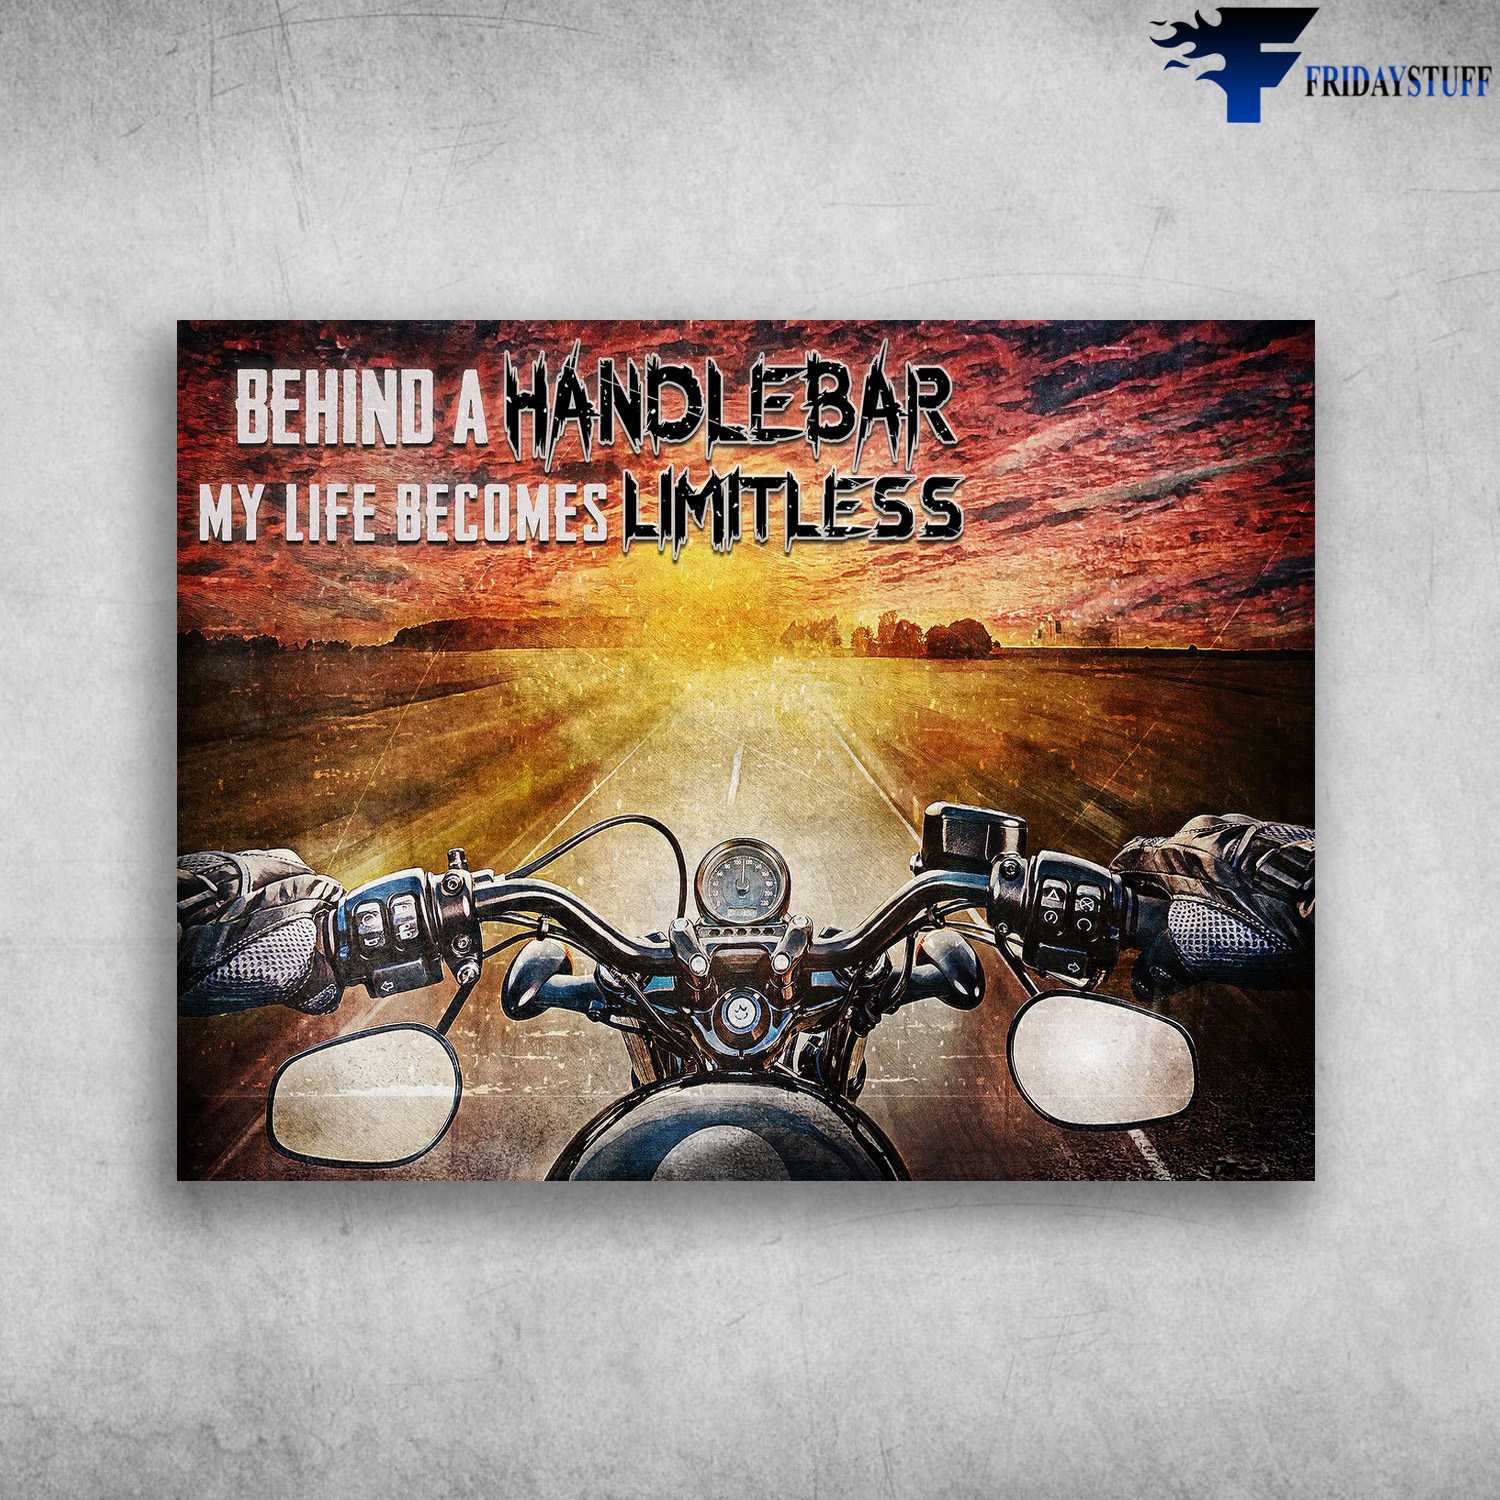 Rider Poster, Biker Decor, Motorcycle Lover, Behind A Handlebar, My Life Becomes Limitless